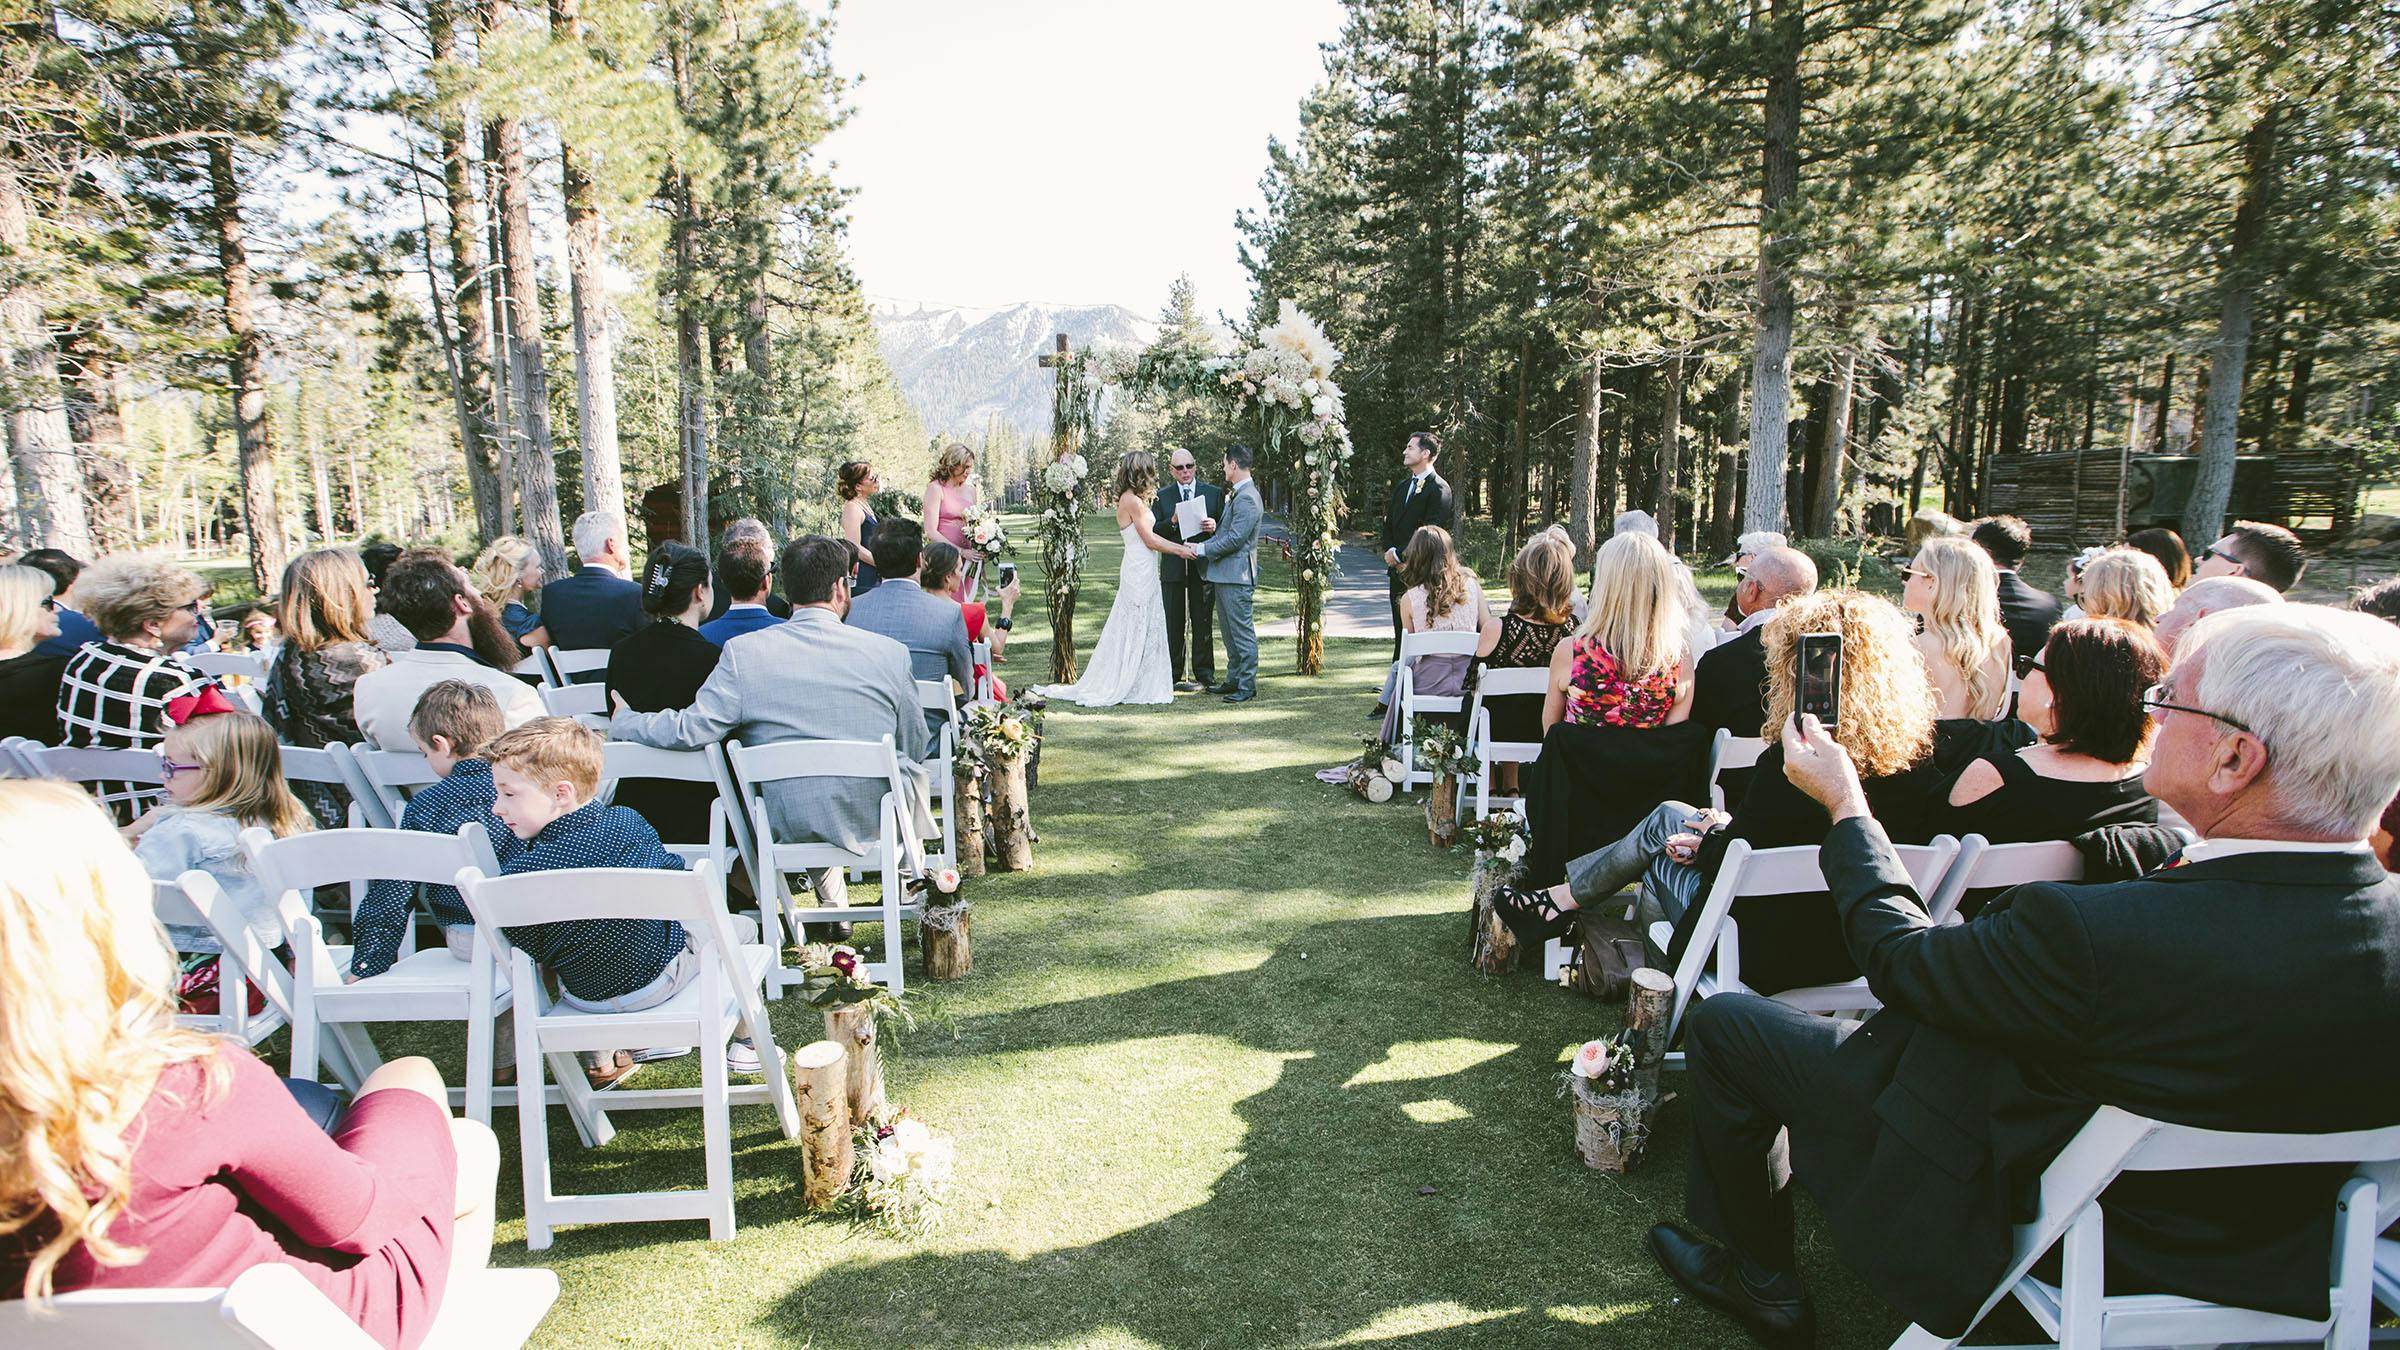 Outdoor wedding at Sierra Star Golf Course in Mammoth Lakes, CA